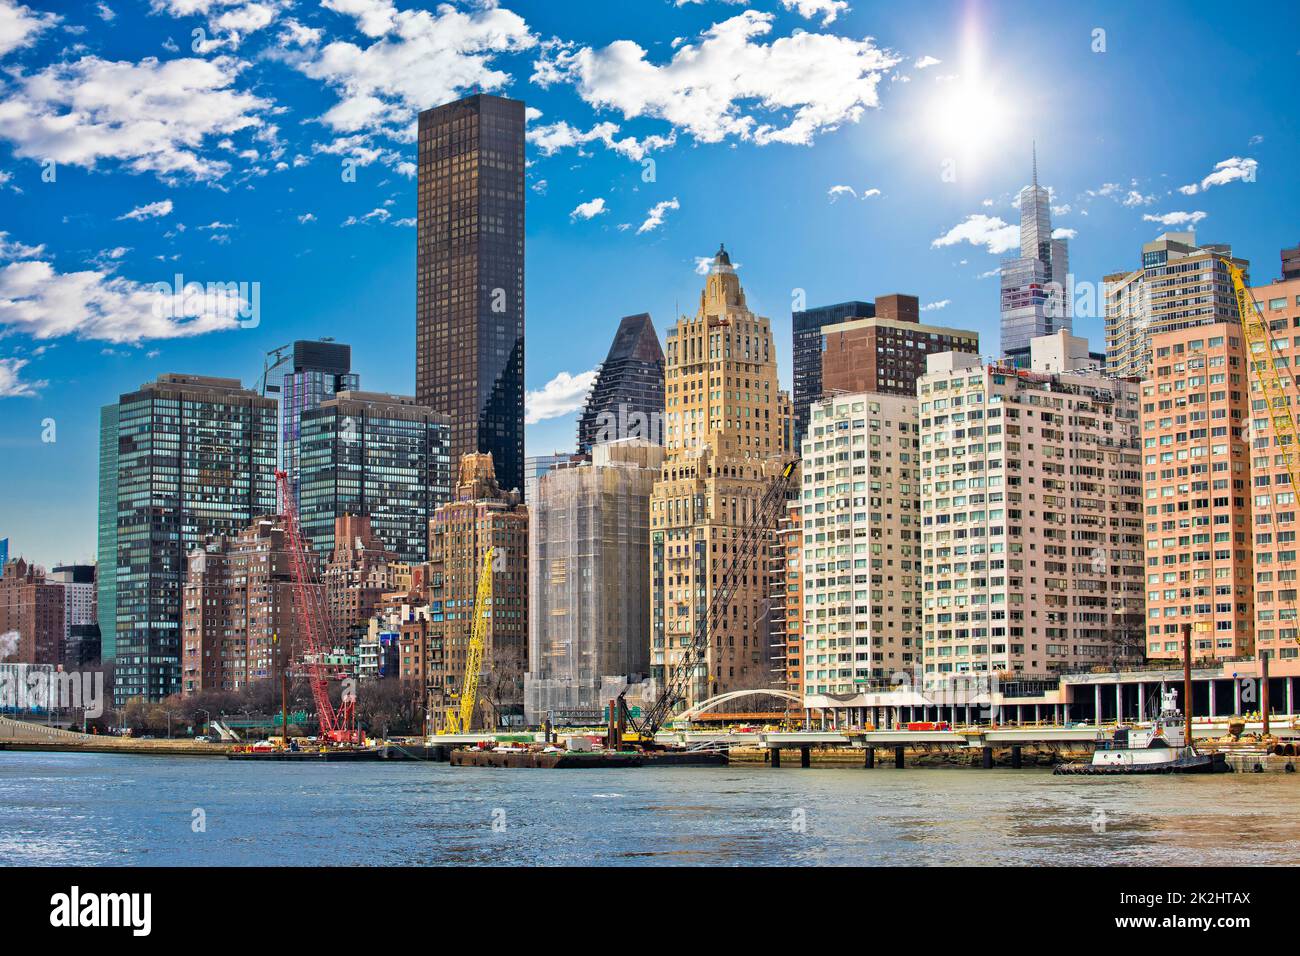 New York City East river waterfront skyline view Stock Photo